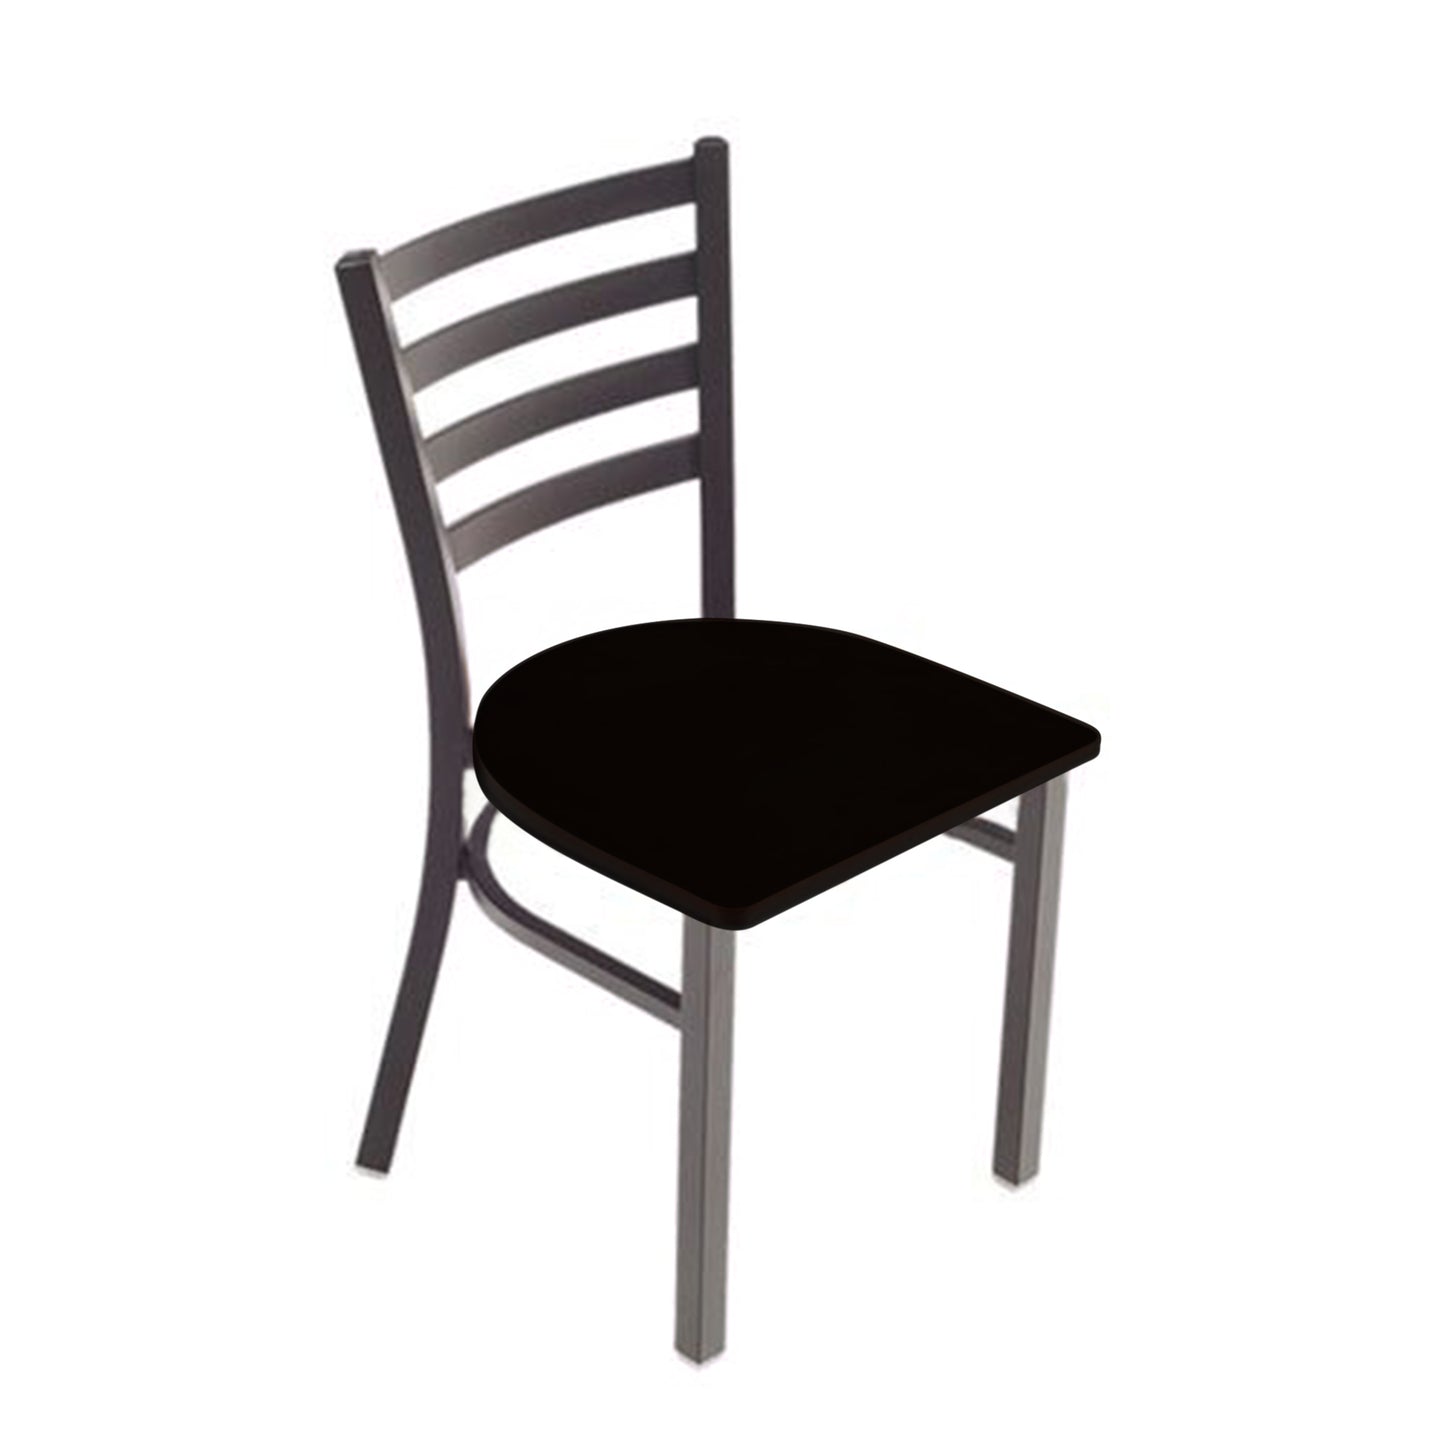 AmTab Cafe Chair - 16.5"W x 17"L x 32.25"H - Seat Height 17.25"H  (AMT-CAFECHAIR-4)